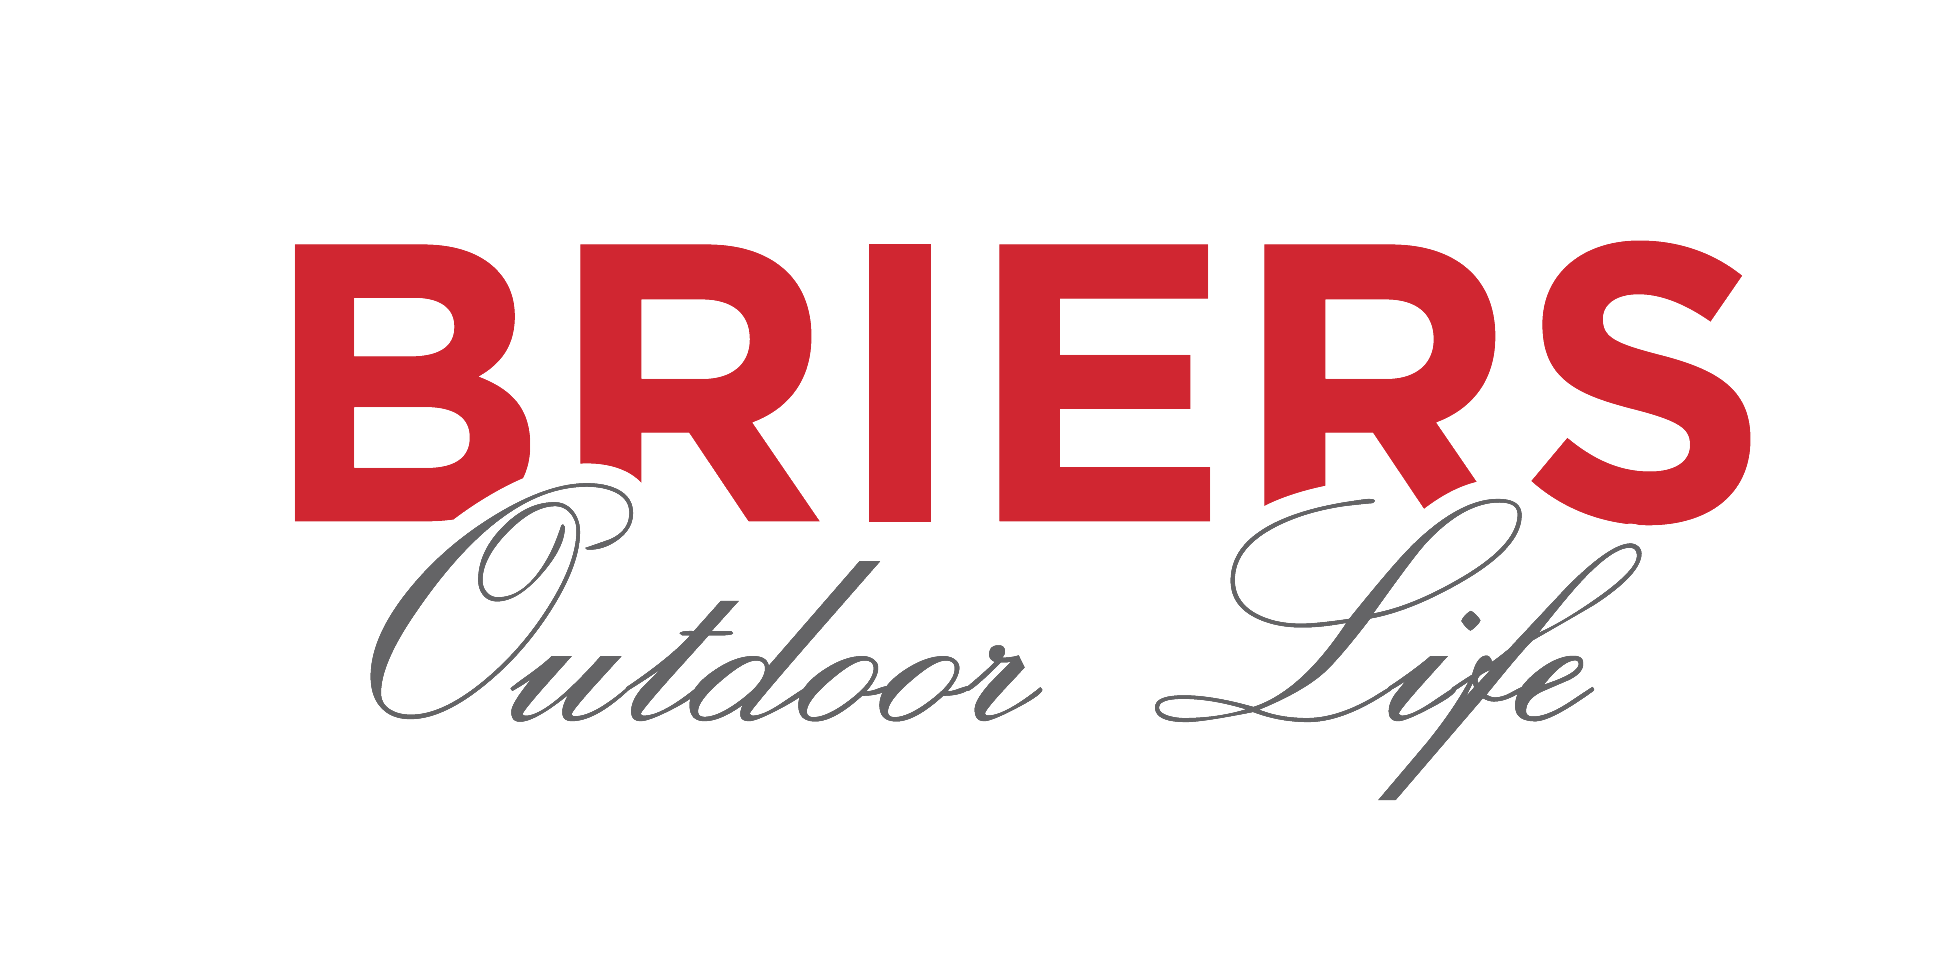 Briers Outdoor Life